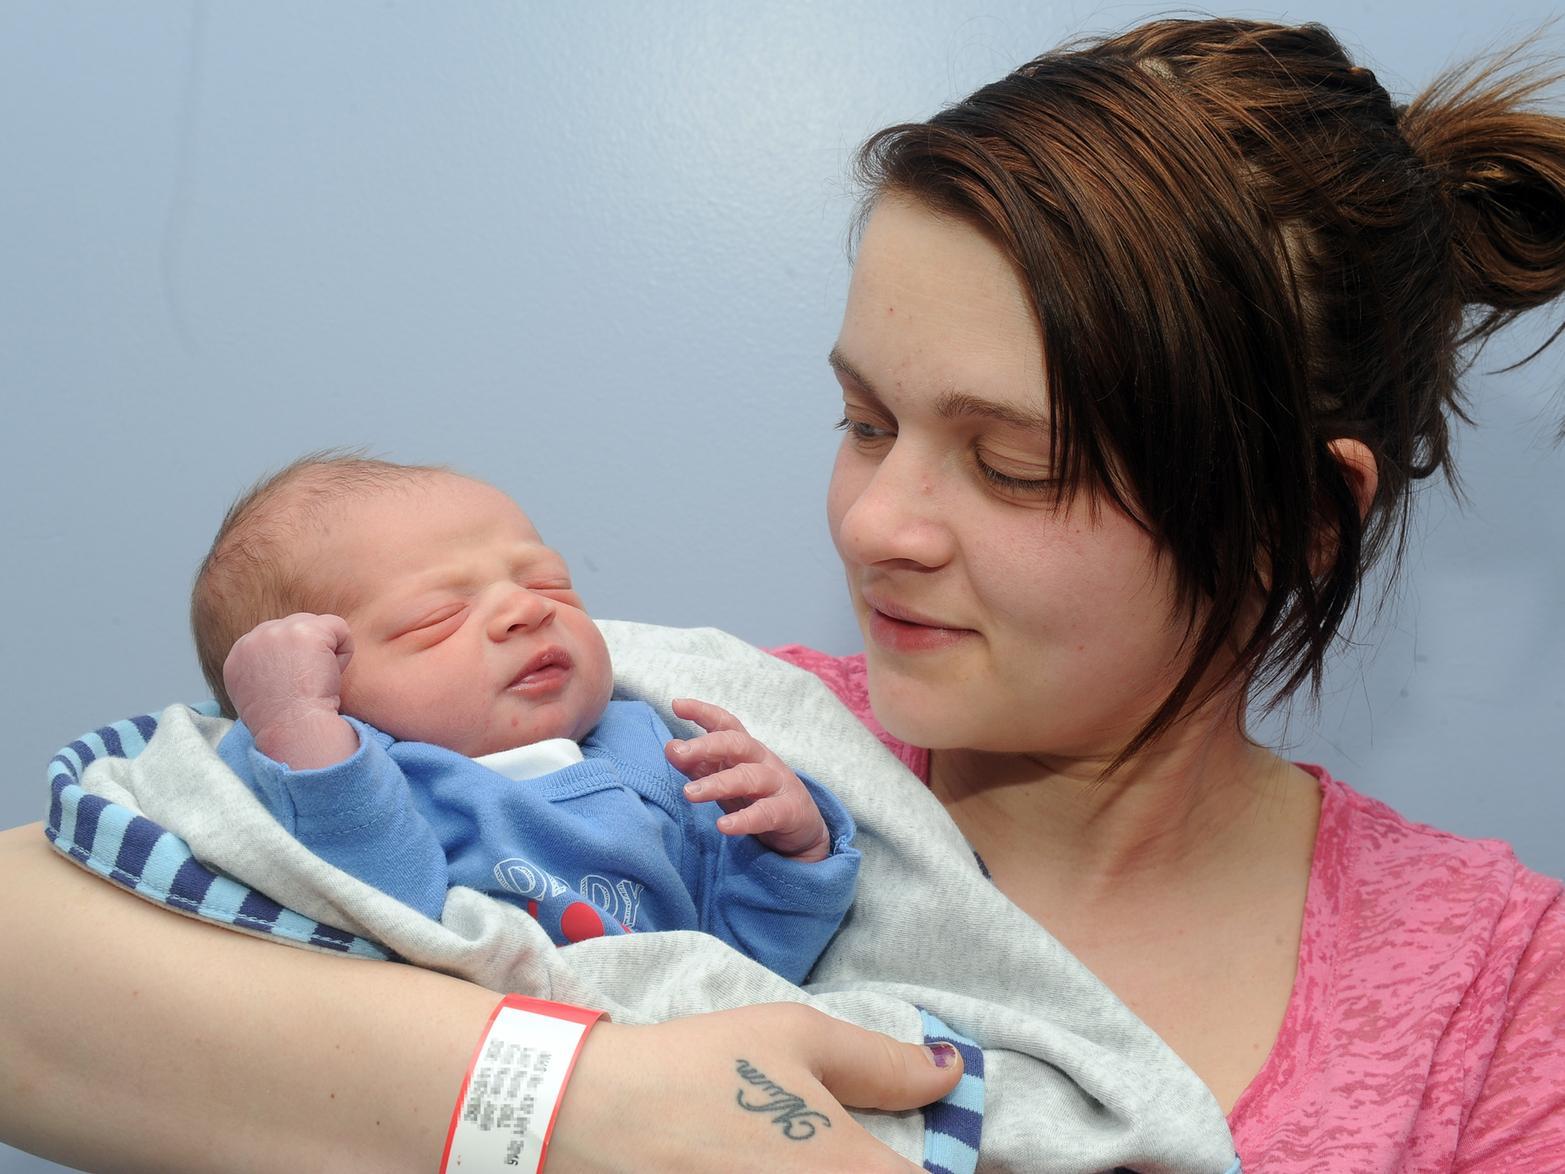 Jodie Gill from Whinmoor with baby CJ Wright at St James's Hospital, born at 1.21am and weighing 6lb 11oz.